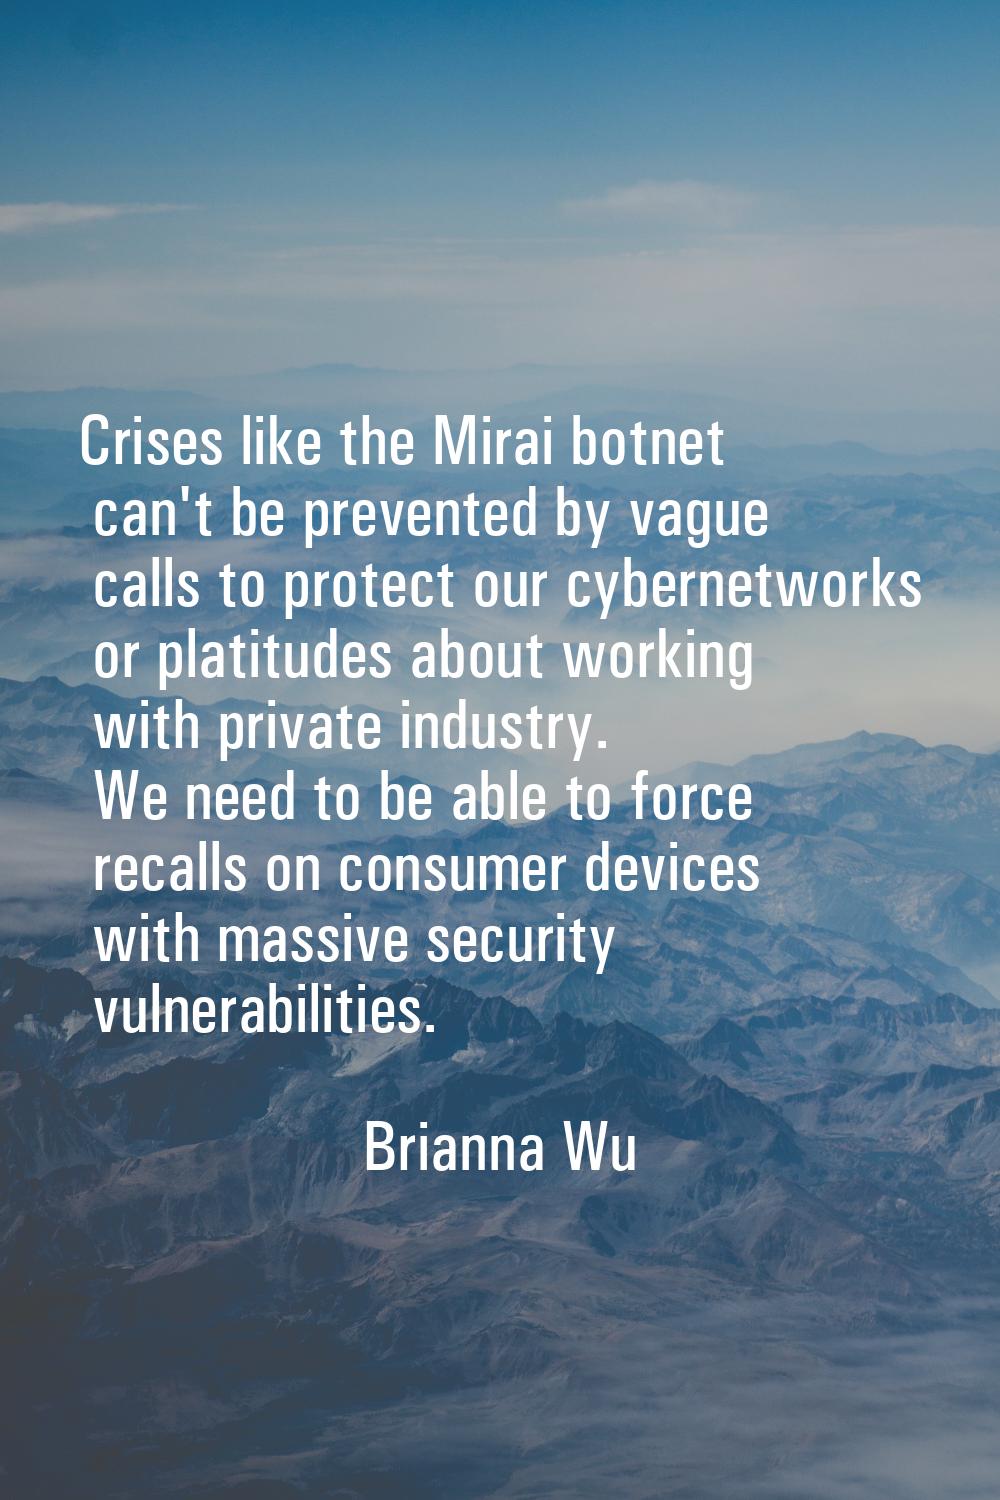 Crises like the Mirai botnet can't be prevented by vague calls to protect our cybernetworks or plat